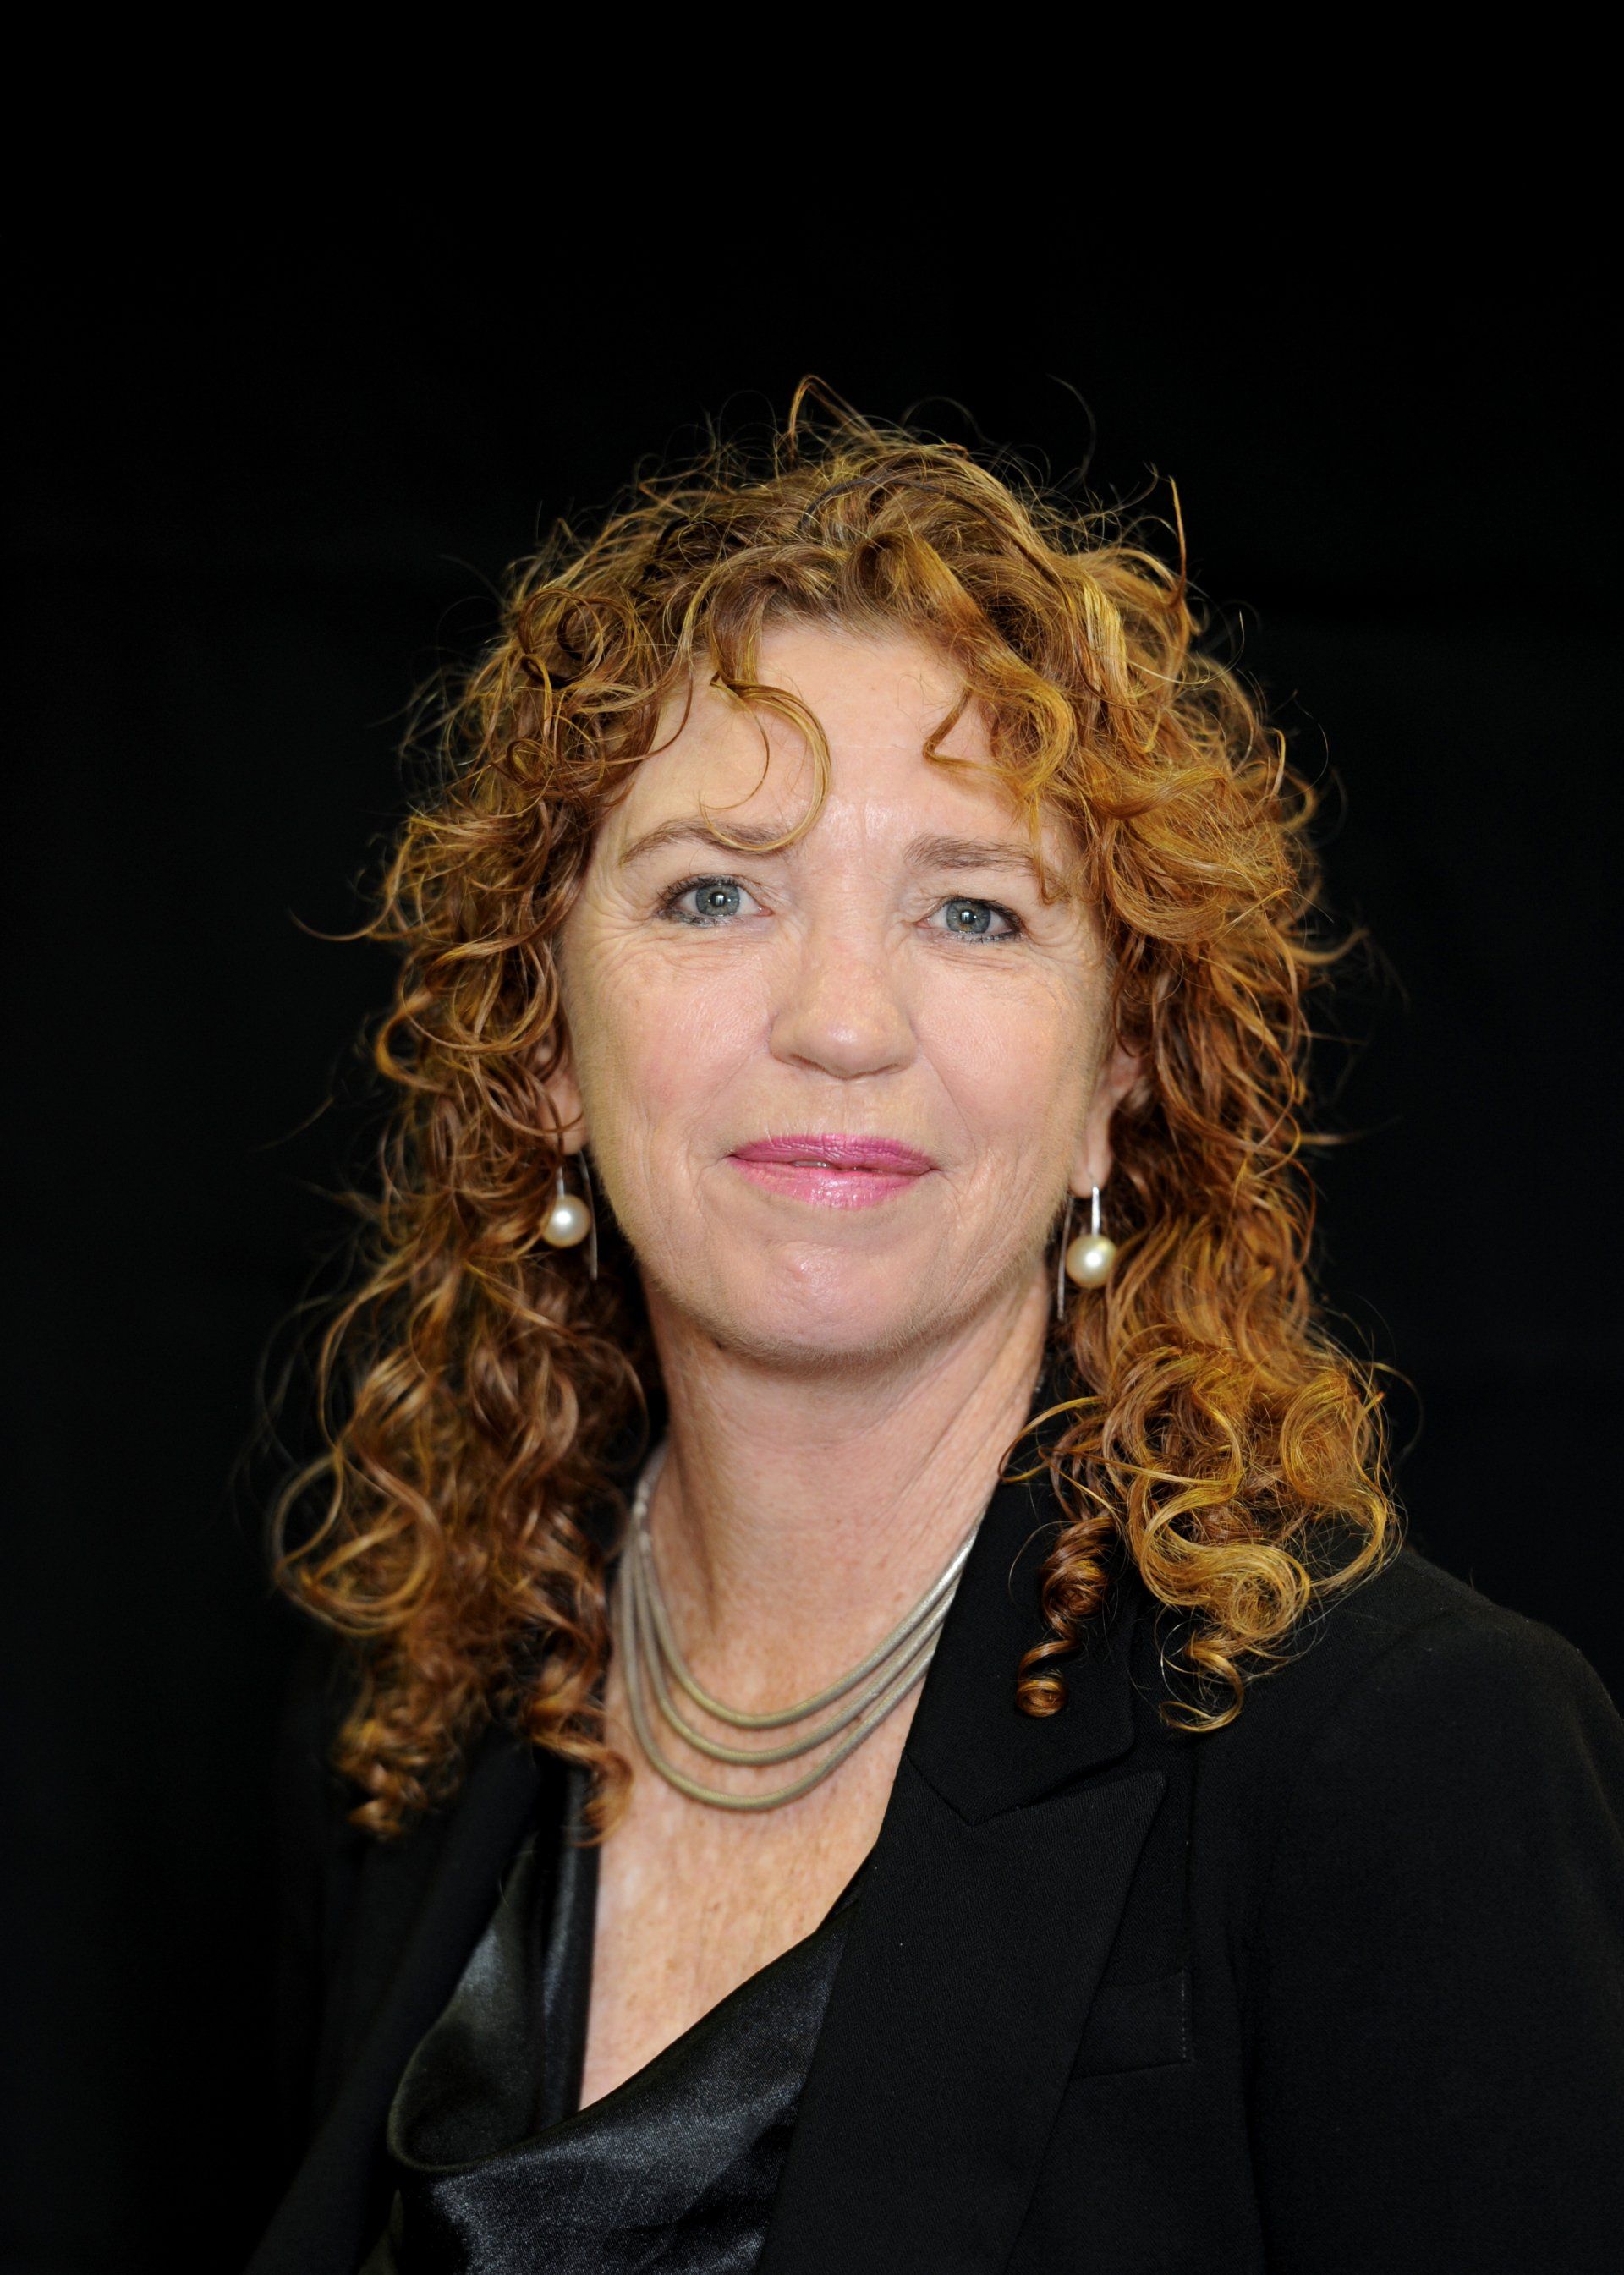 A woman with red curly hair is wearing a black jacket and pearl earrings.